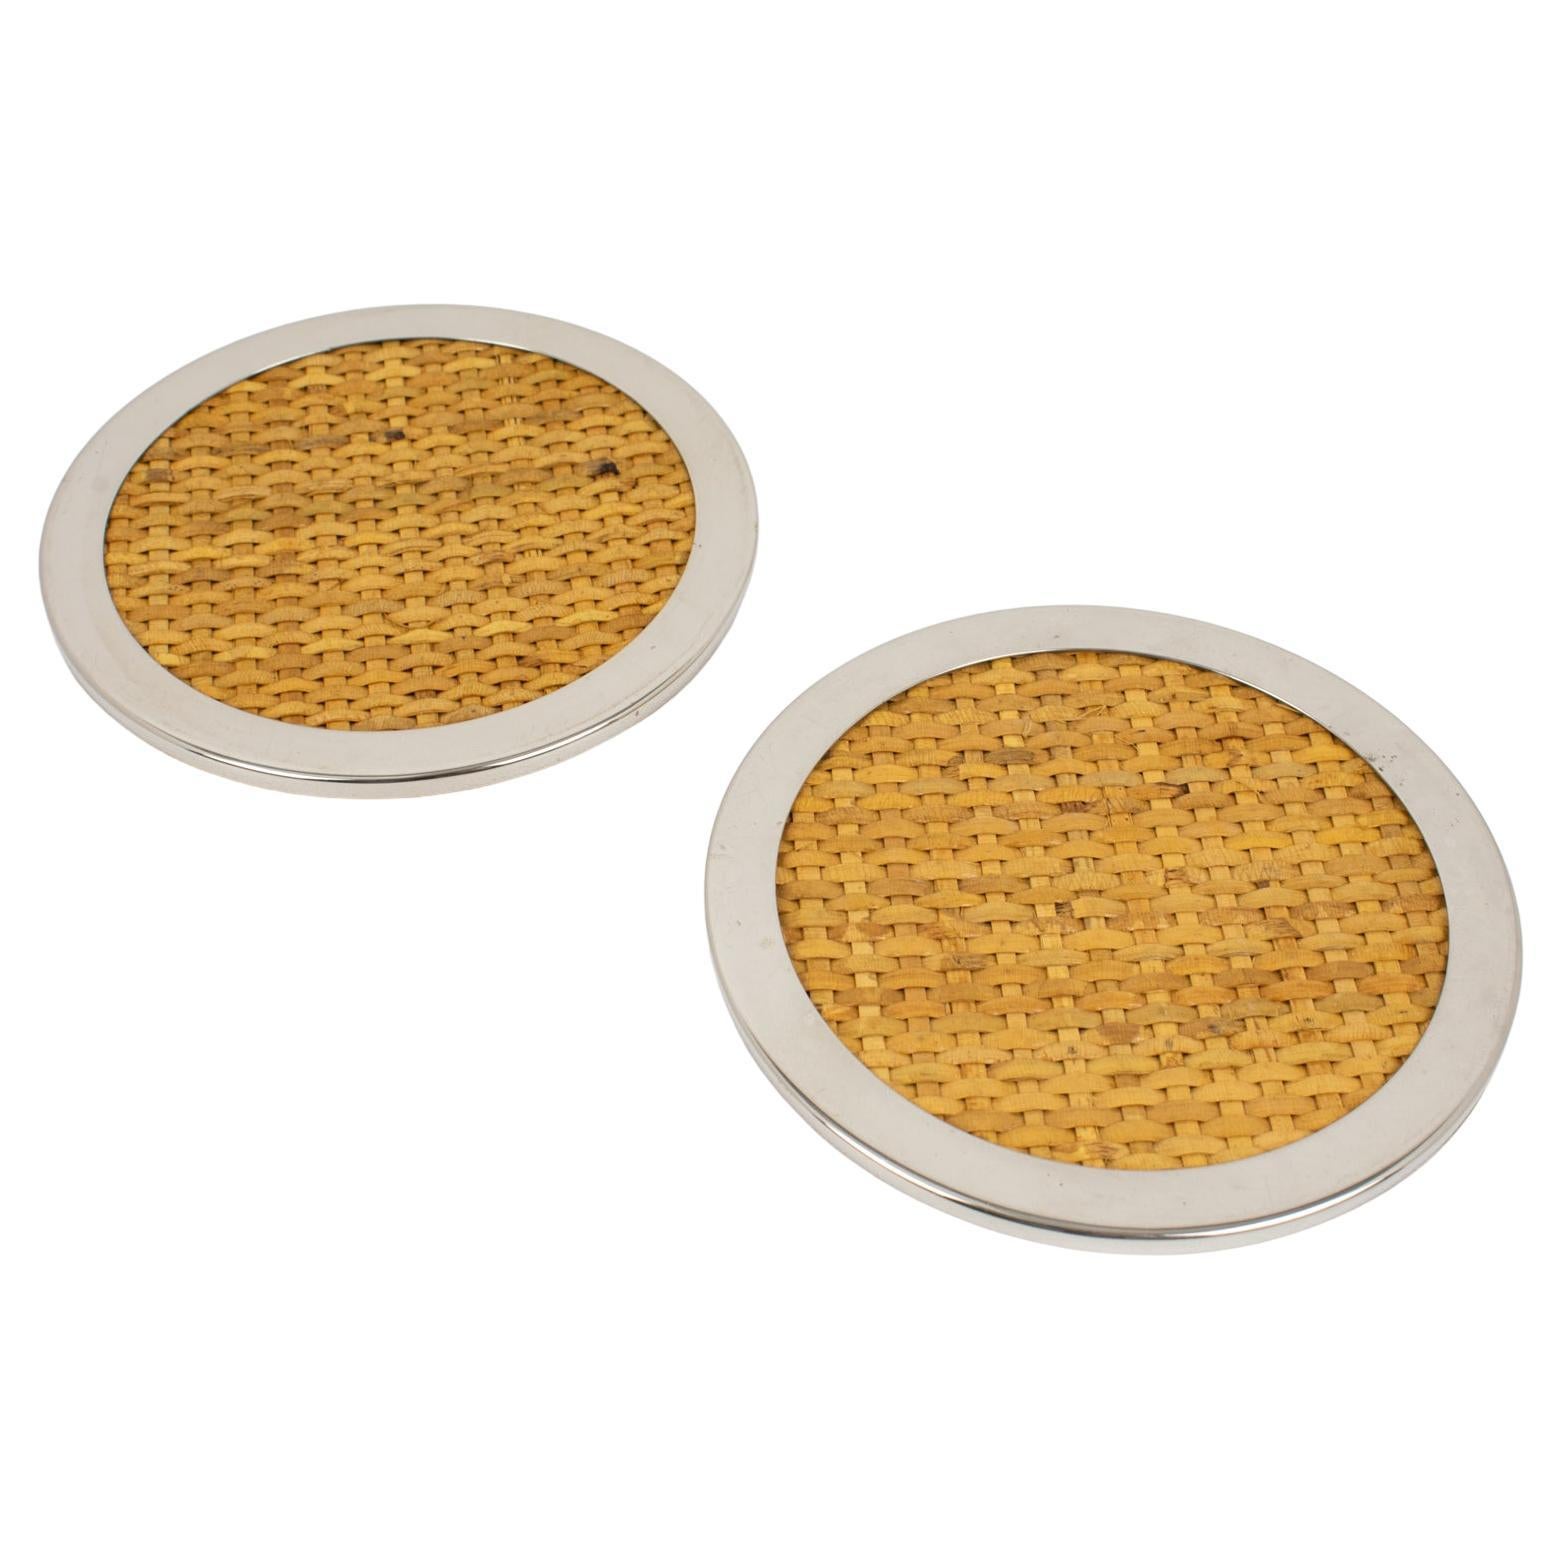 Tommaso Barbi Wicker and Chrome Set of Two Coasters, 1970s